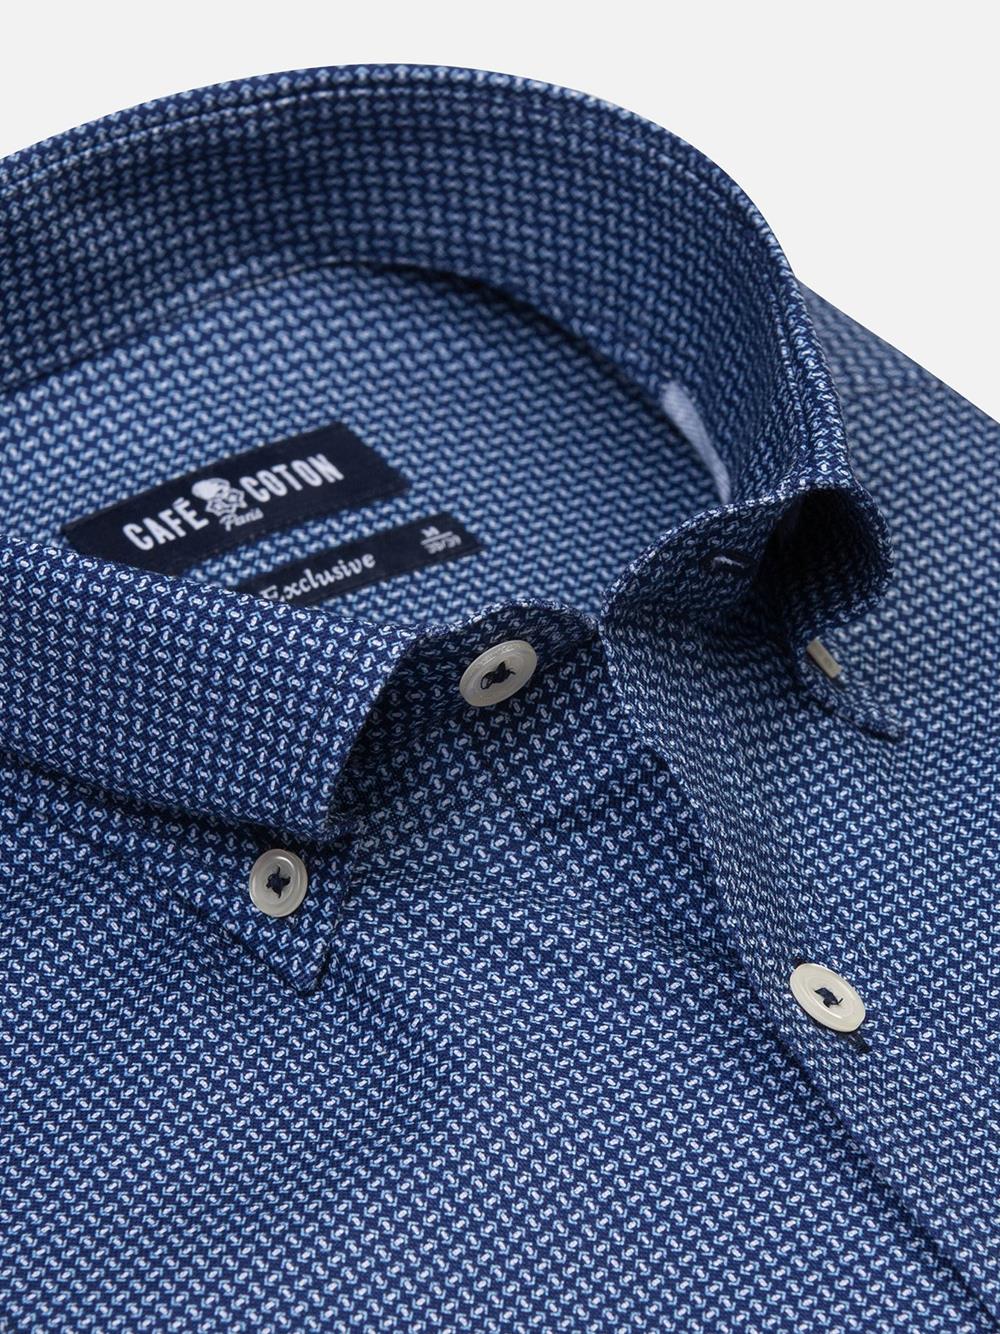 Dan navy blue slim fit shirt with printed pattern - Button-down collar